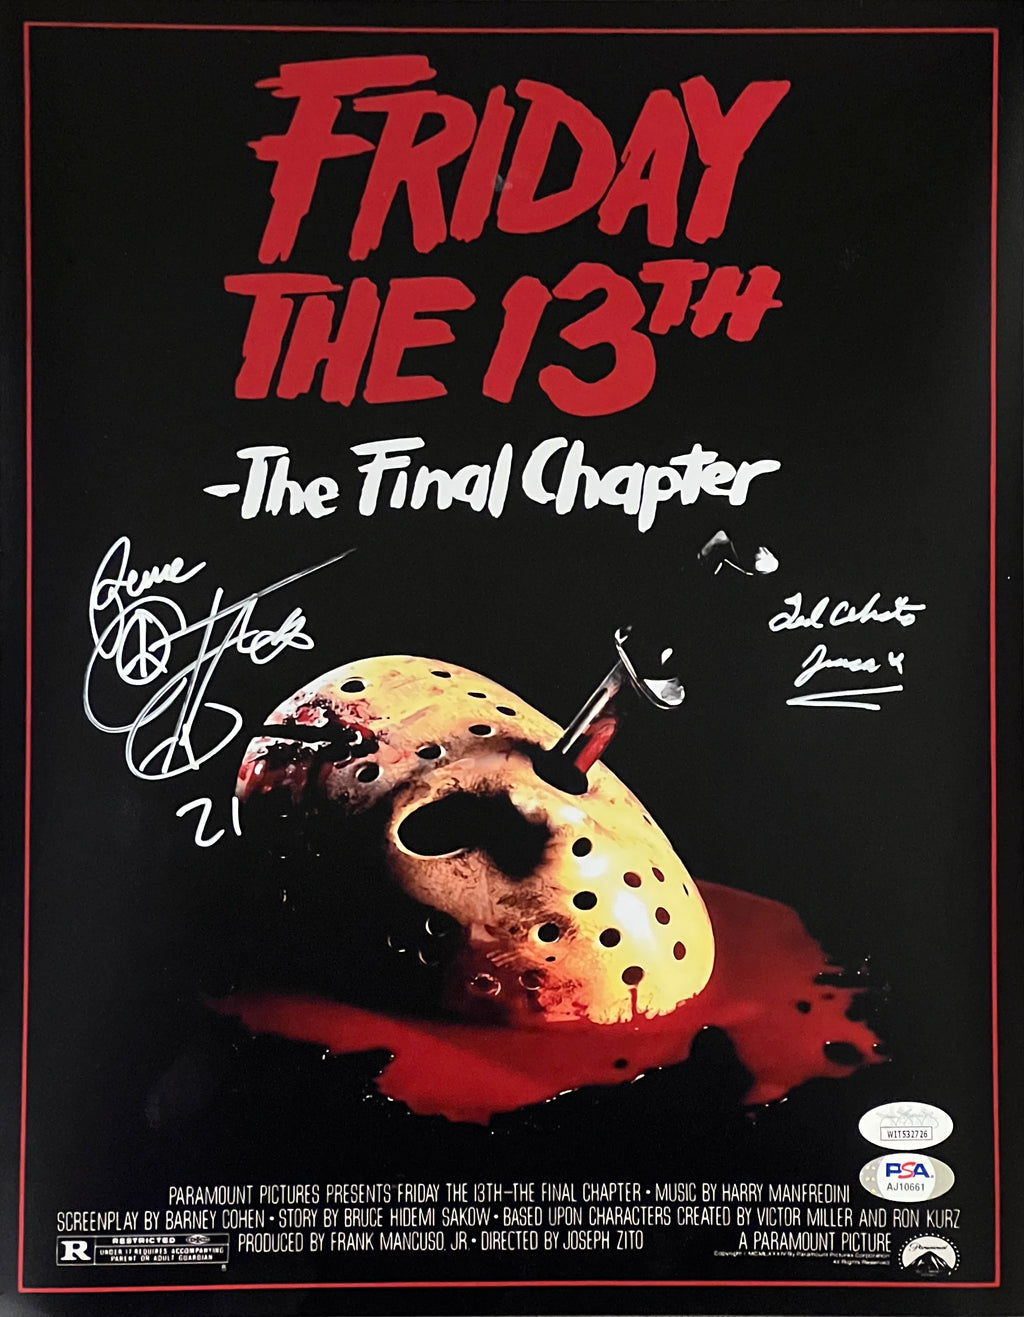 Corey Feldman Ted White autographed inscribed 11x14 photo Friday The 13th JSA